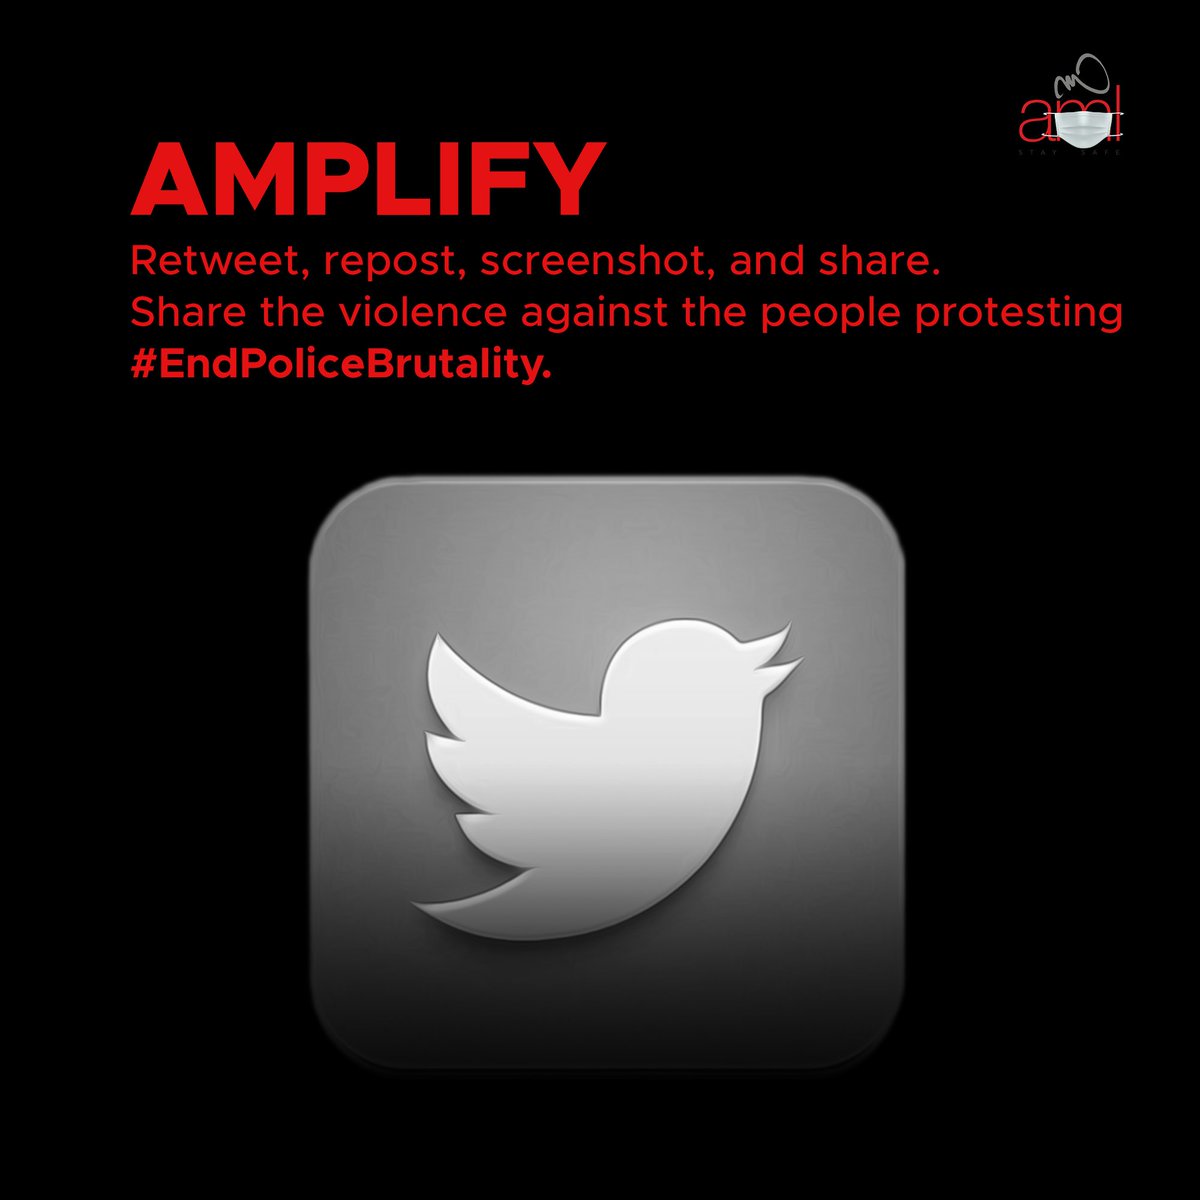 Amplify: Retweet, repost, screenshot, and share. Share the violence against the people peacefully at the